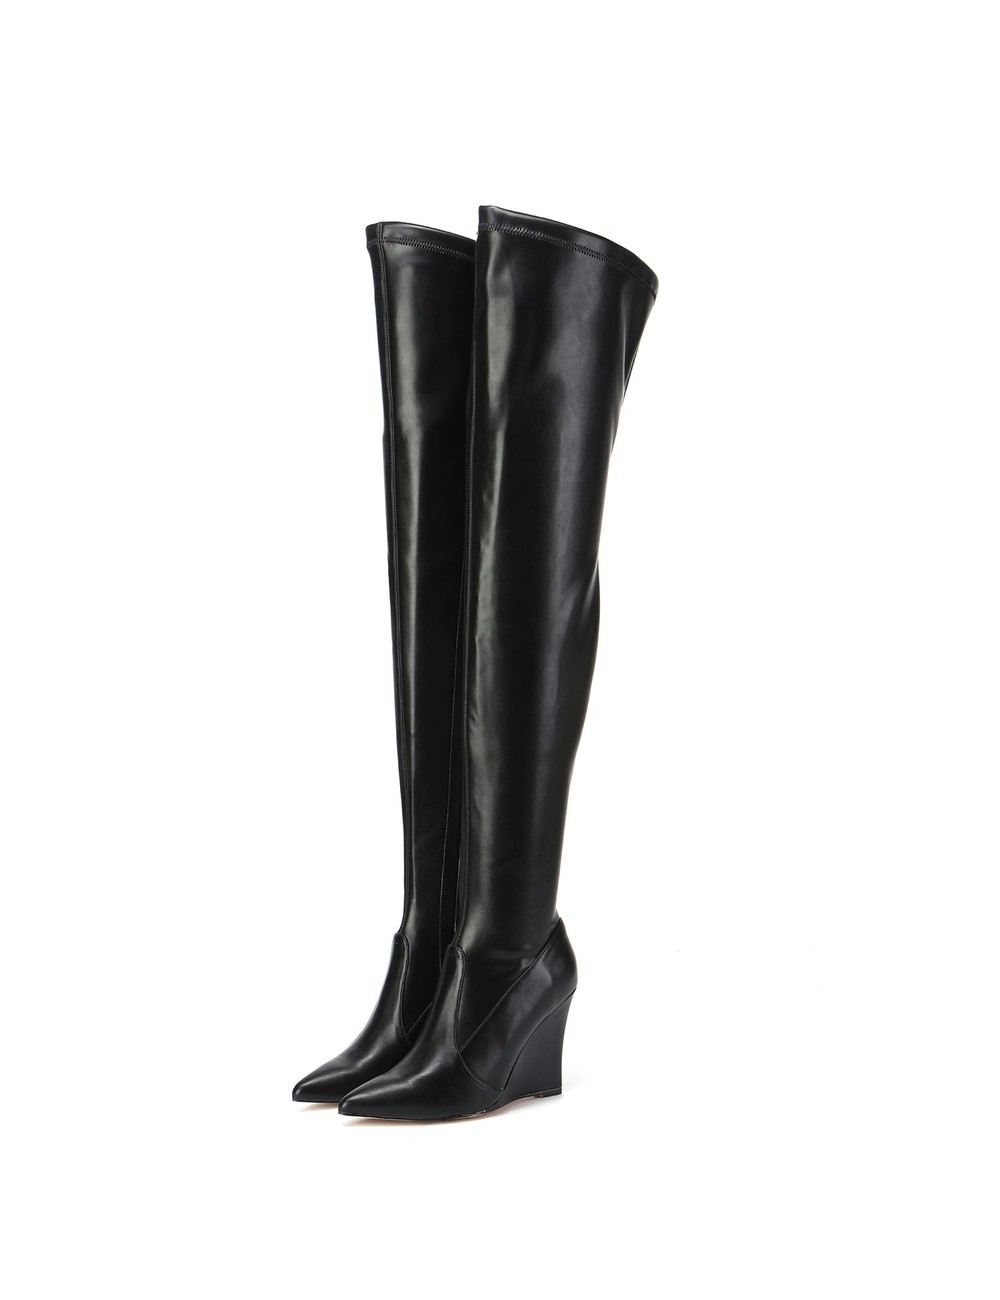 Giaro Giaro thigh boots with wedge heel EVERSON in black matte